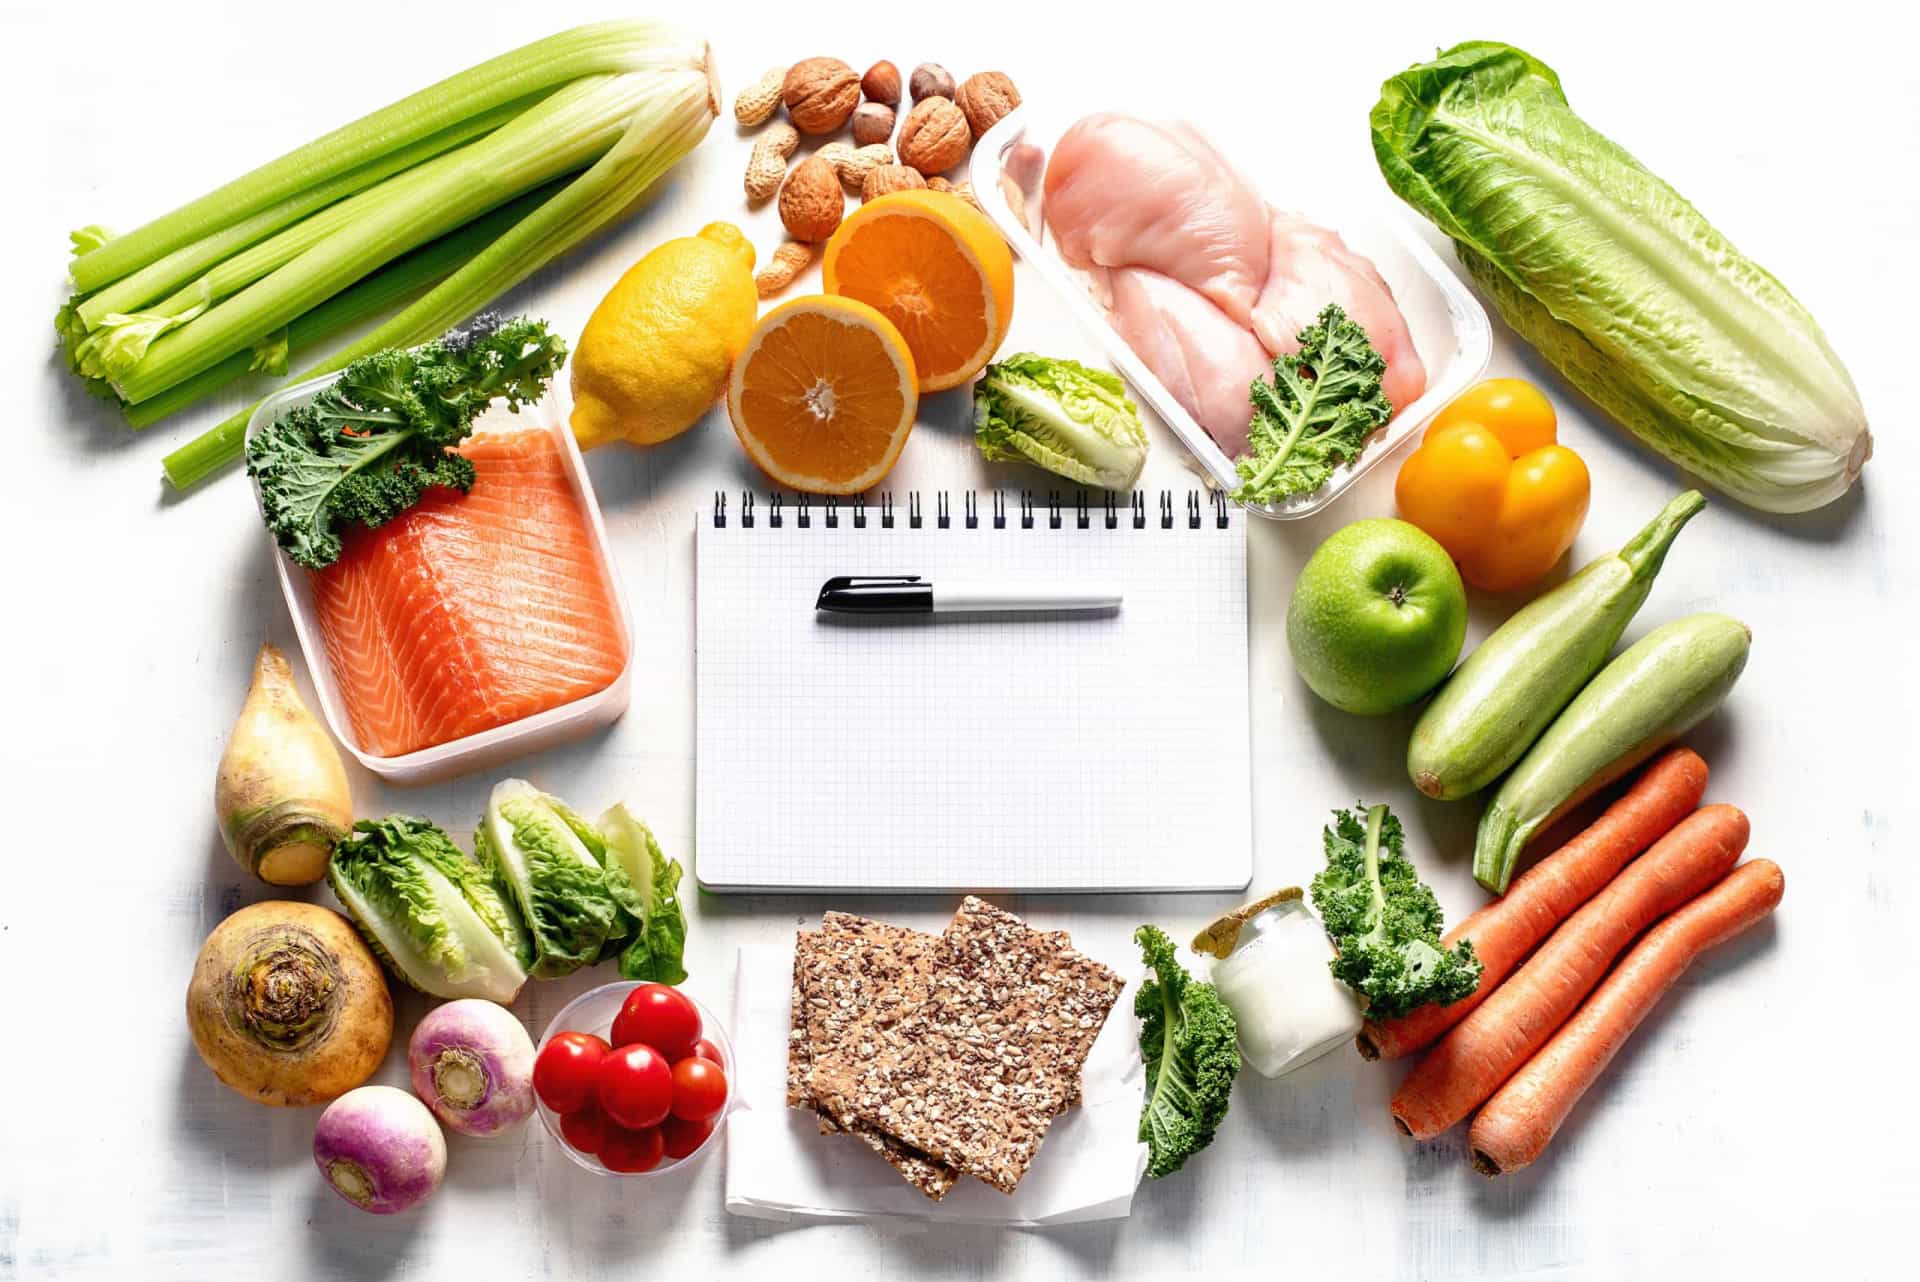 Weekly meal plans and shopping lists can be beneficial for your health and your wallet!